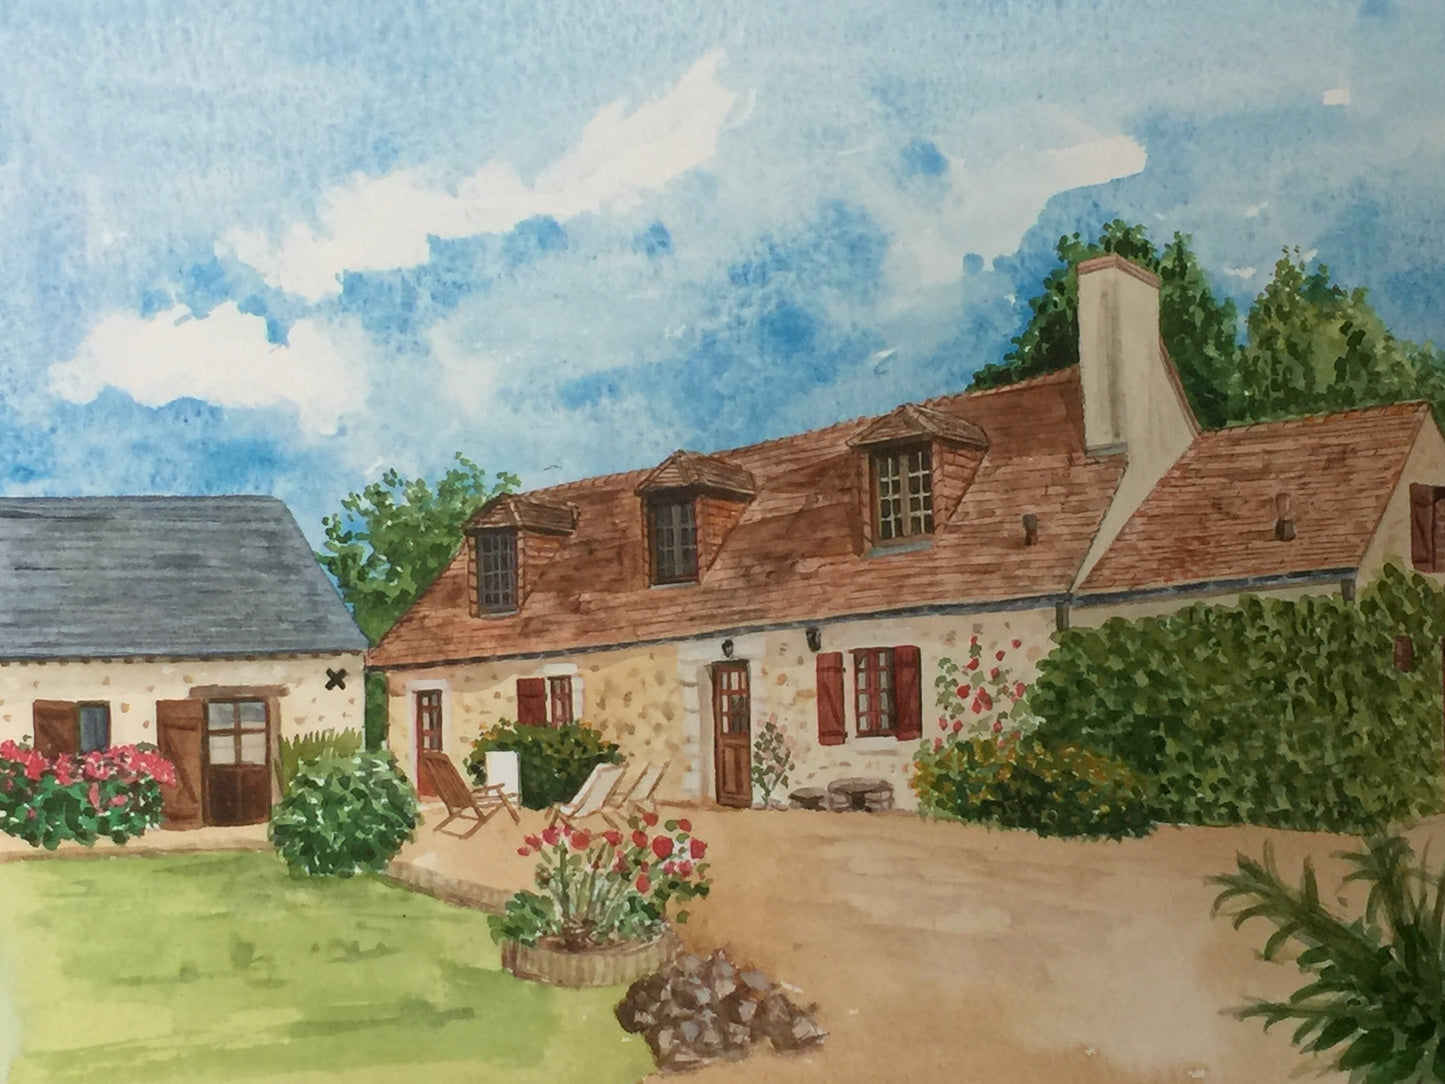 ;BUTCOUNTRY;House/landscape watercolor;CUSTOM ORDER;-;Active;188